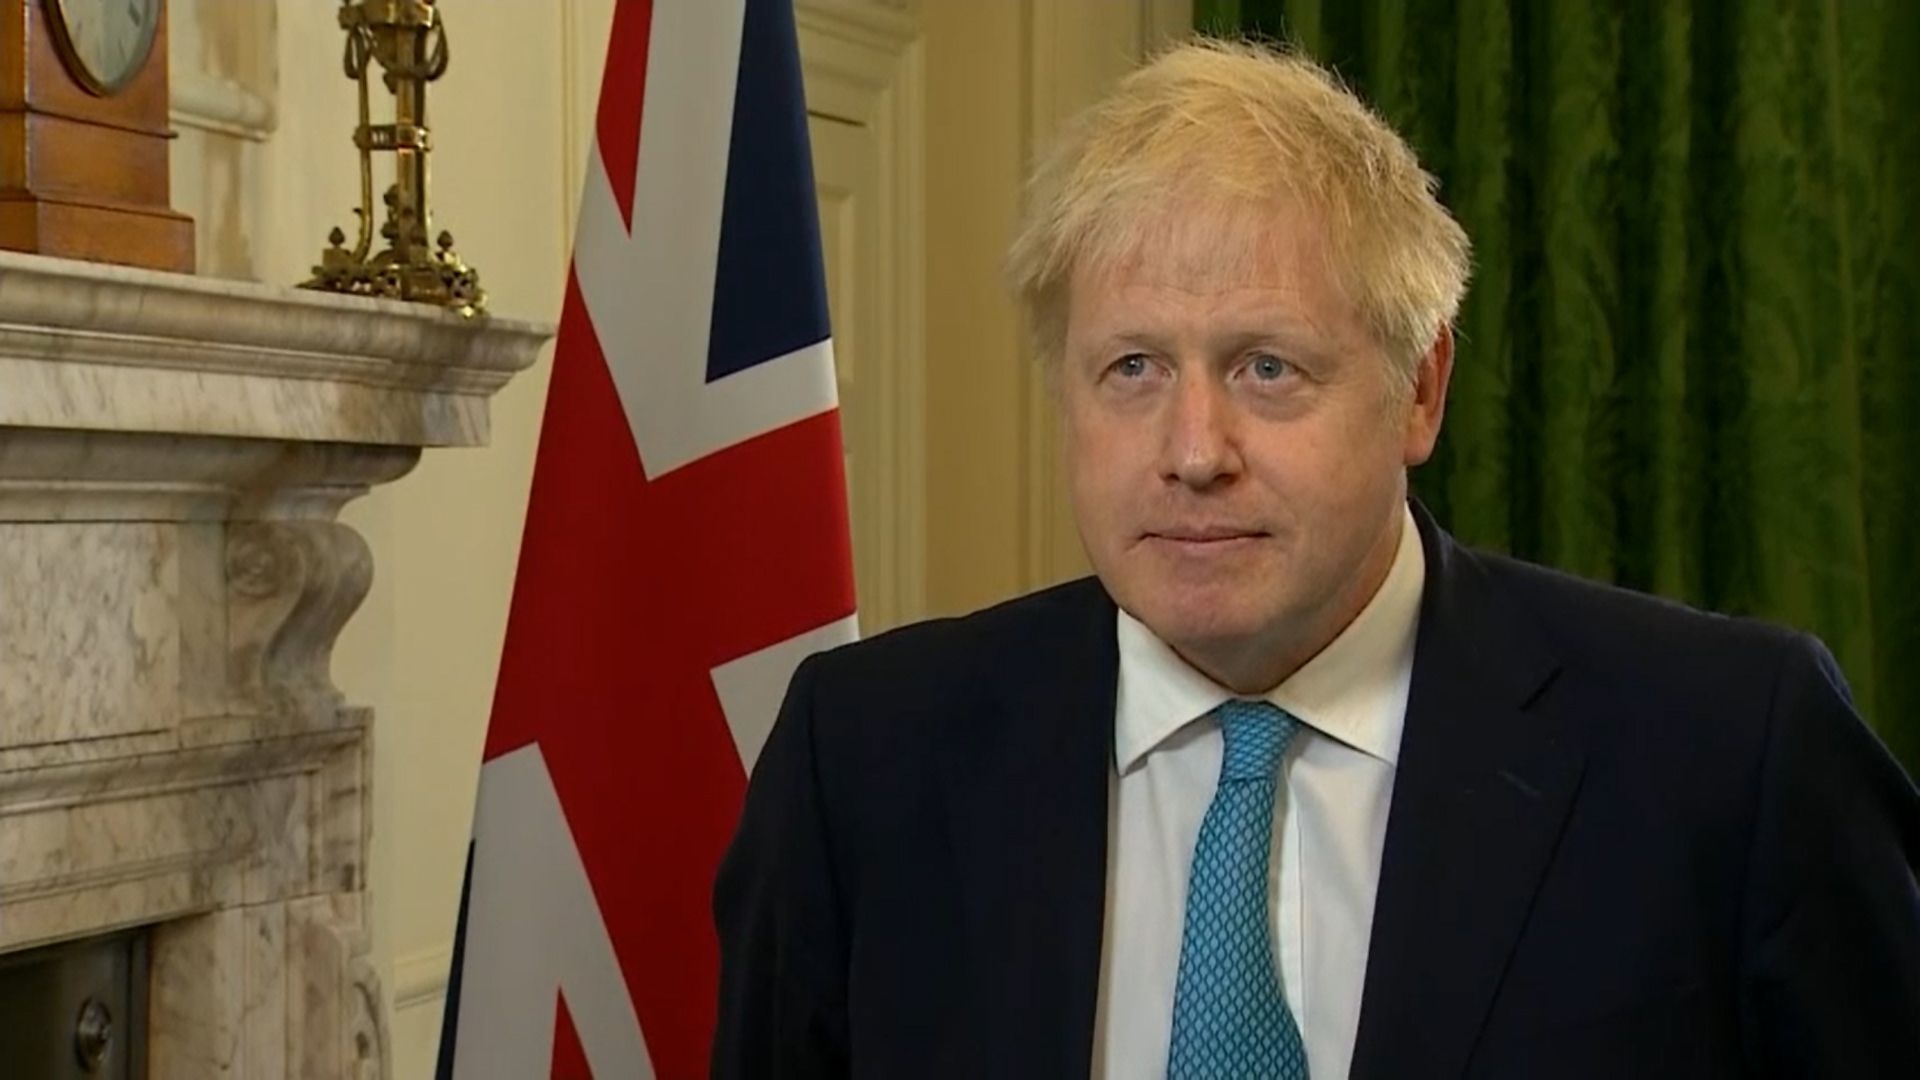 Boris Johnson at 10 Downing Street giving a statement on post-Brexit trade talks - Credit: PA